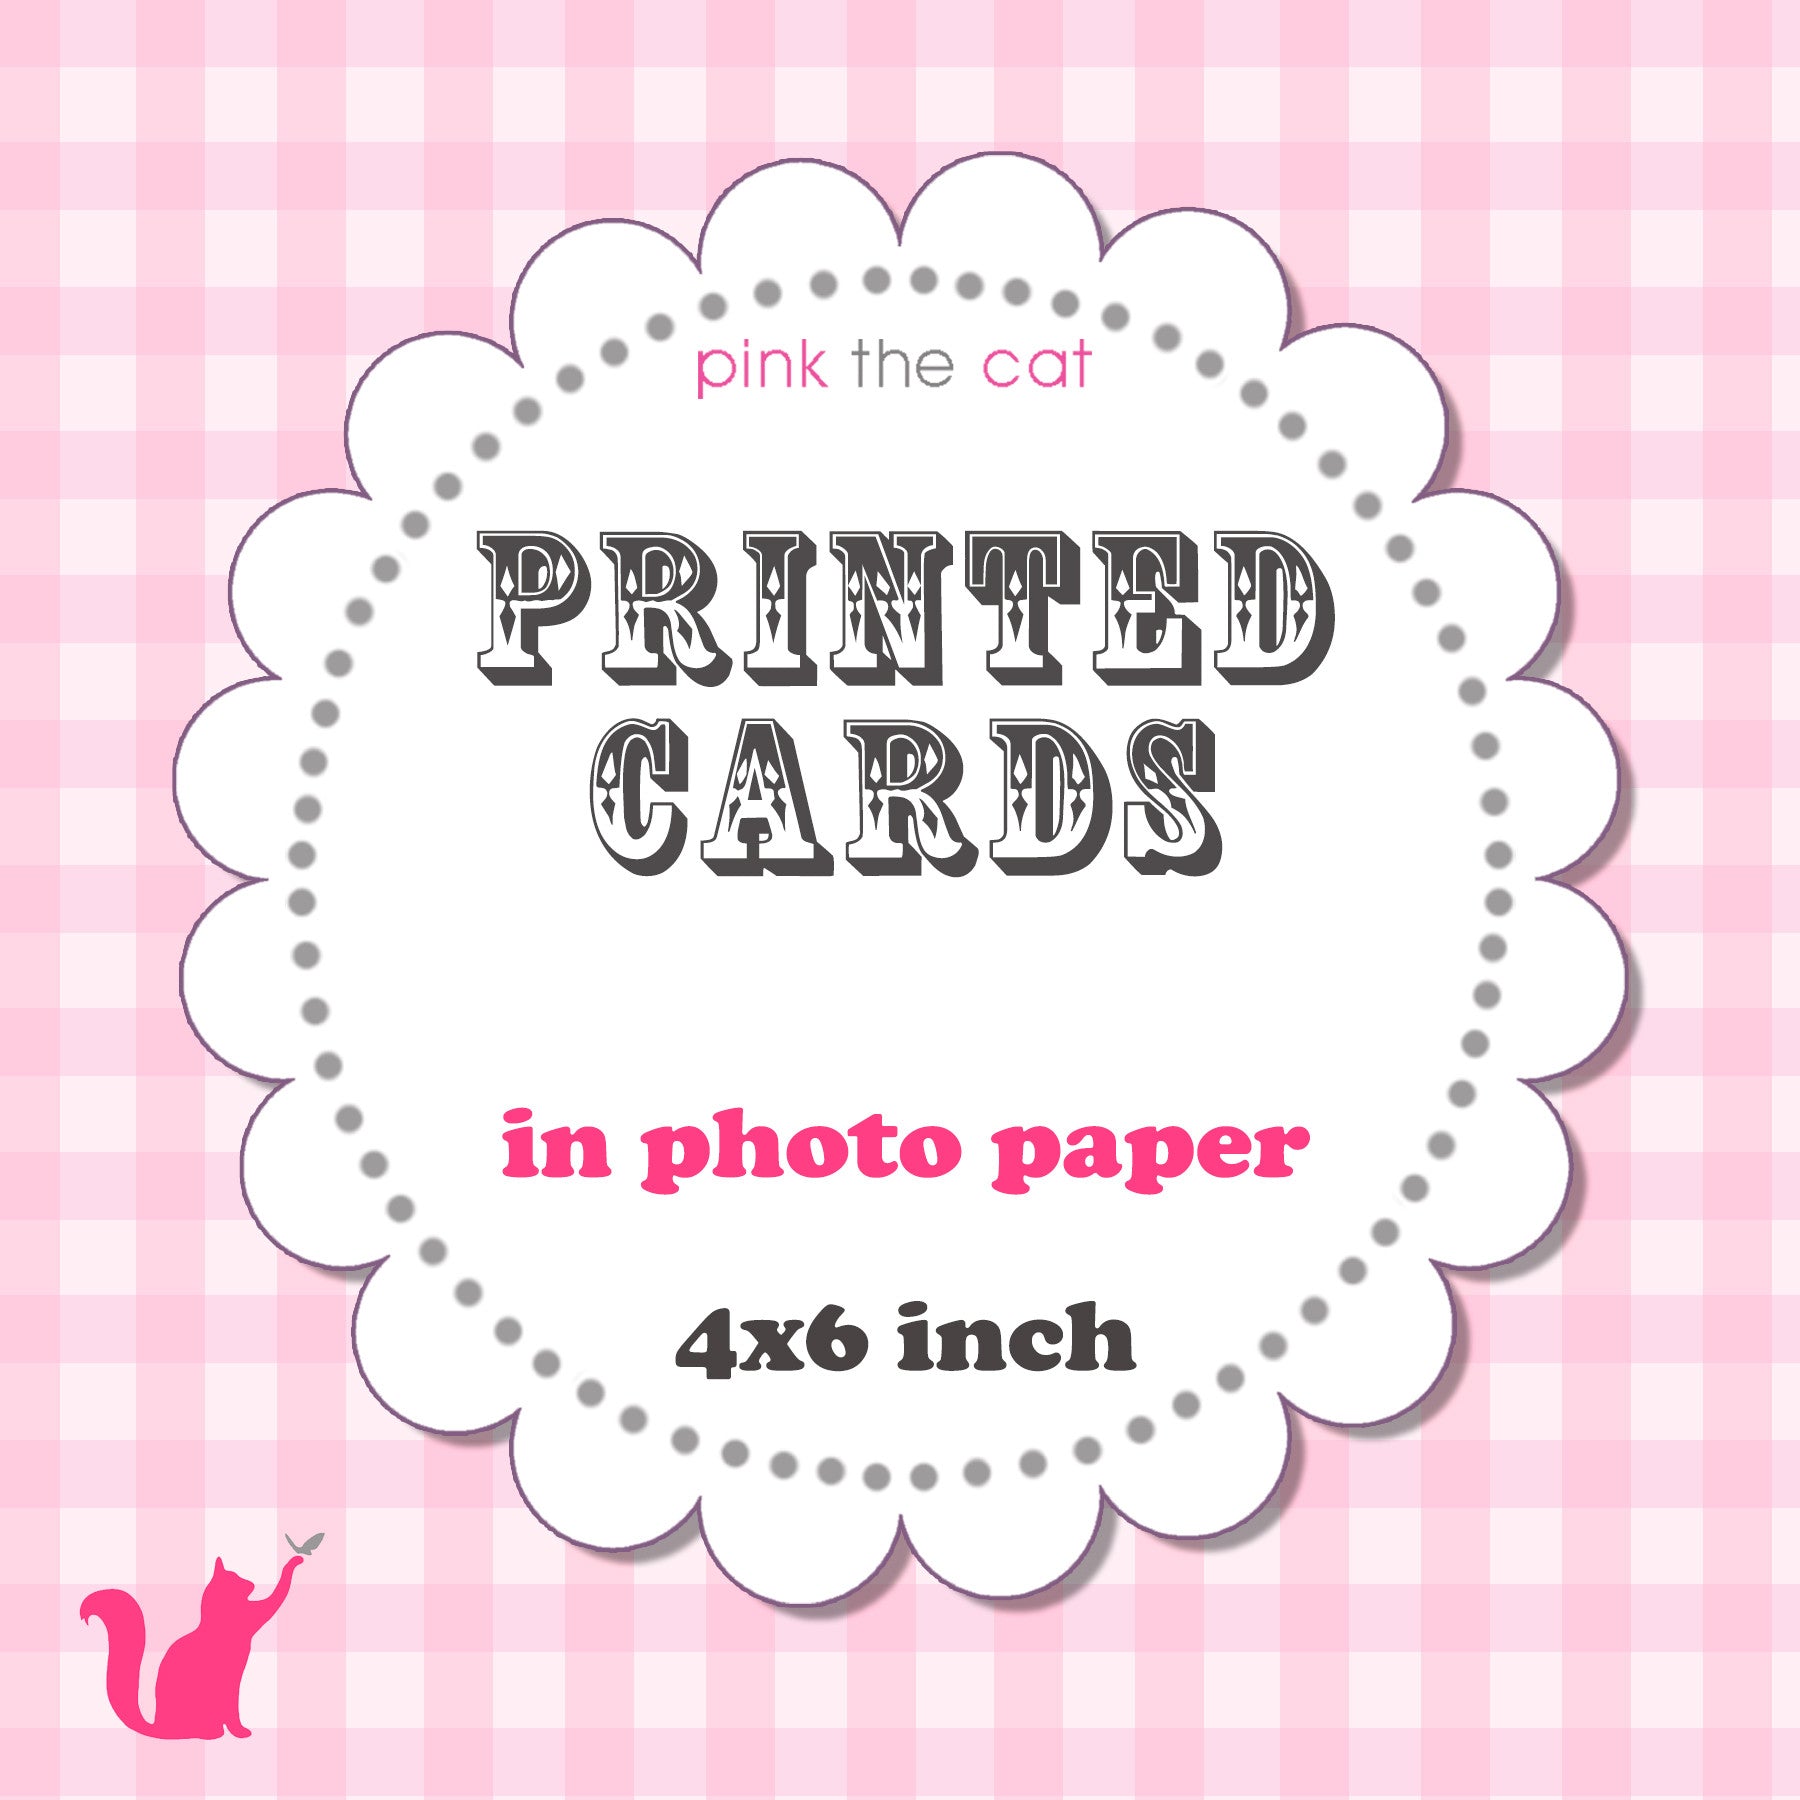 Printed Invitations or Thank You Cards Photo Paper